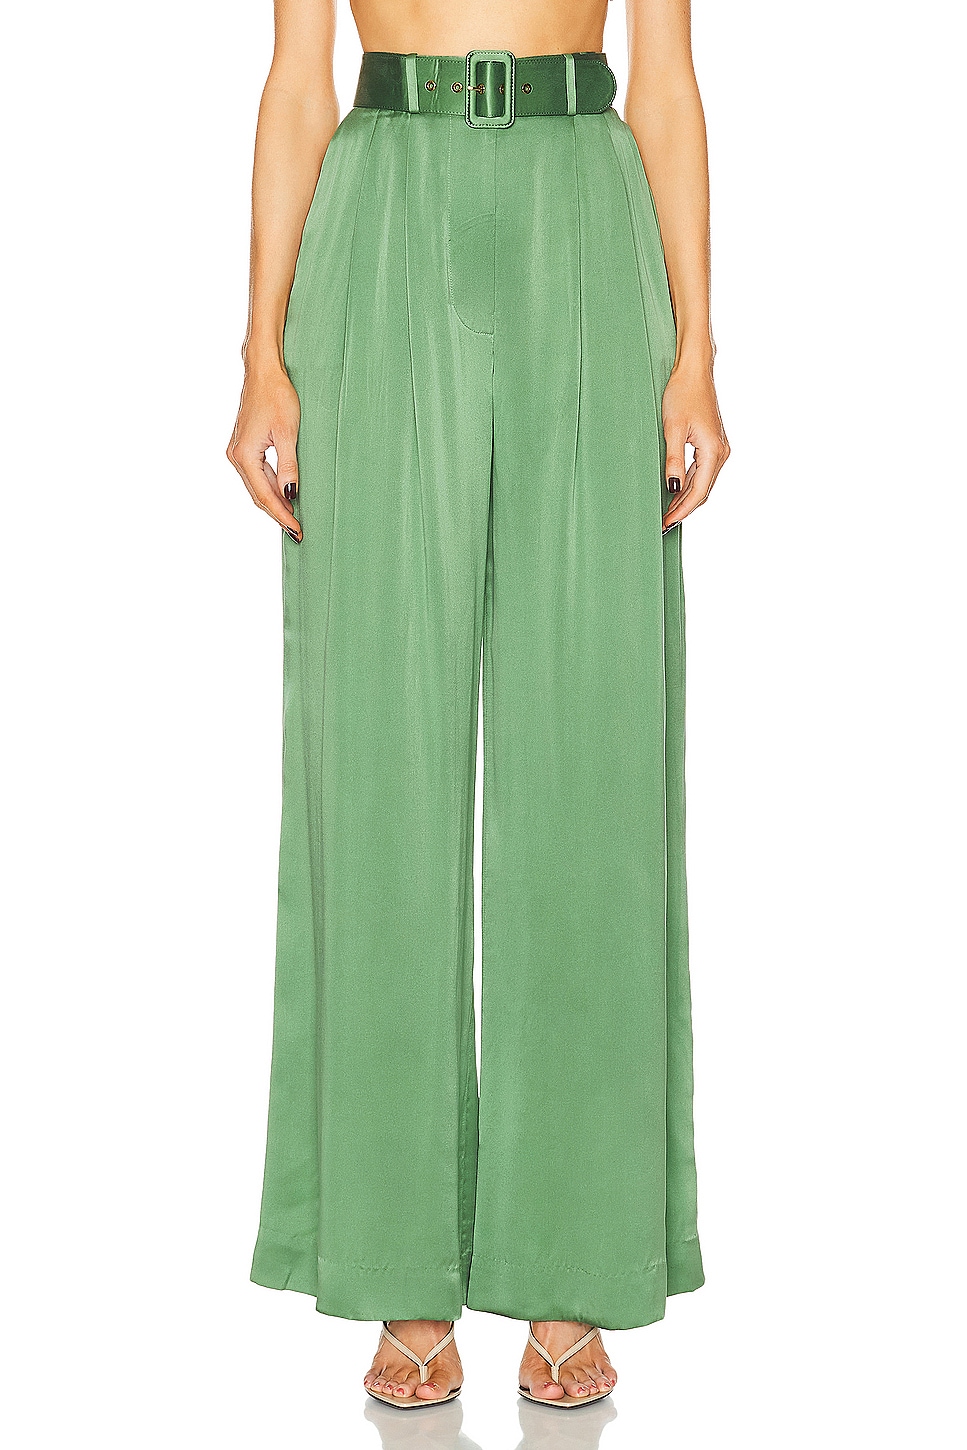 Image 1 of Zimmermann Silk Tuck Pant in Matcha